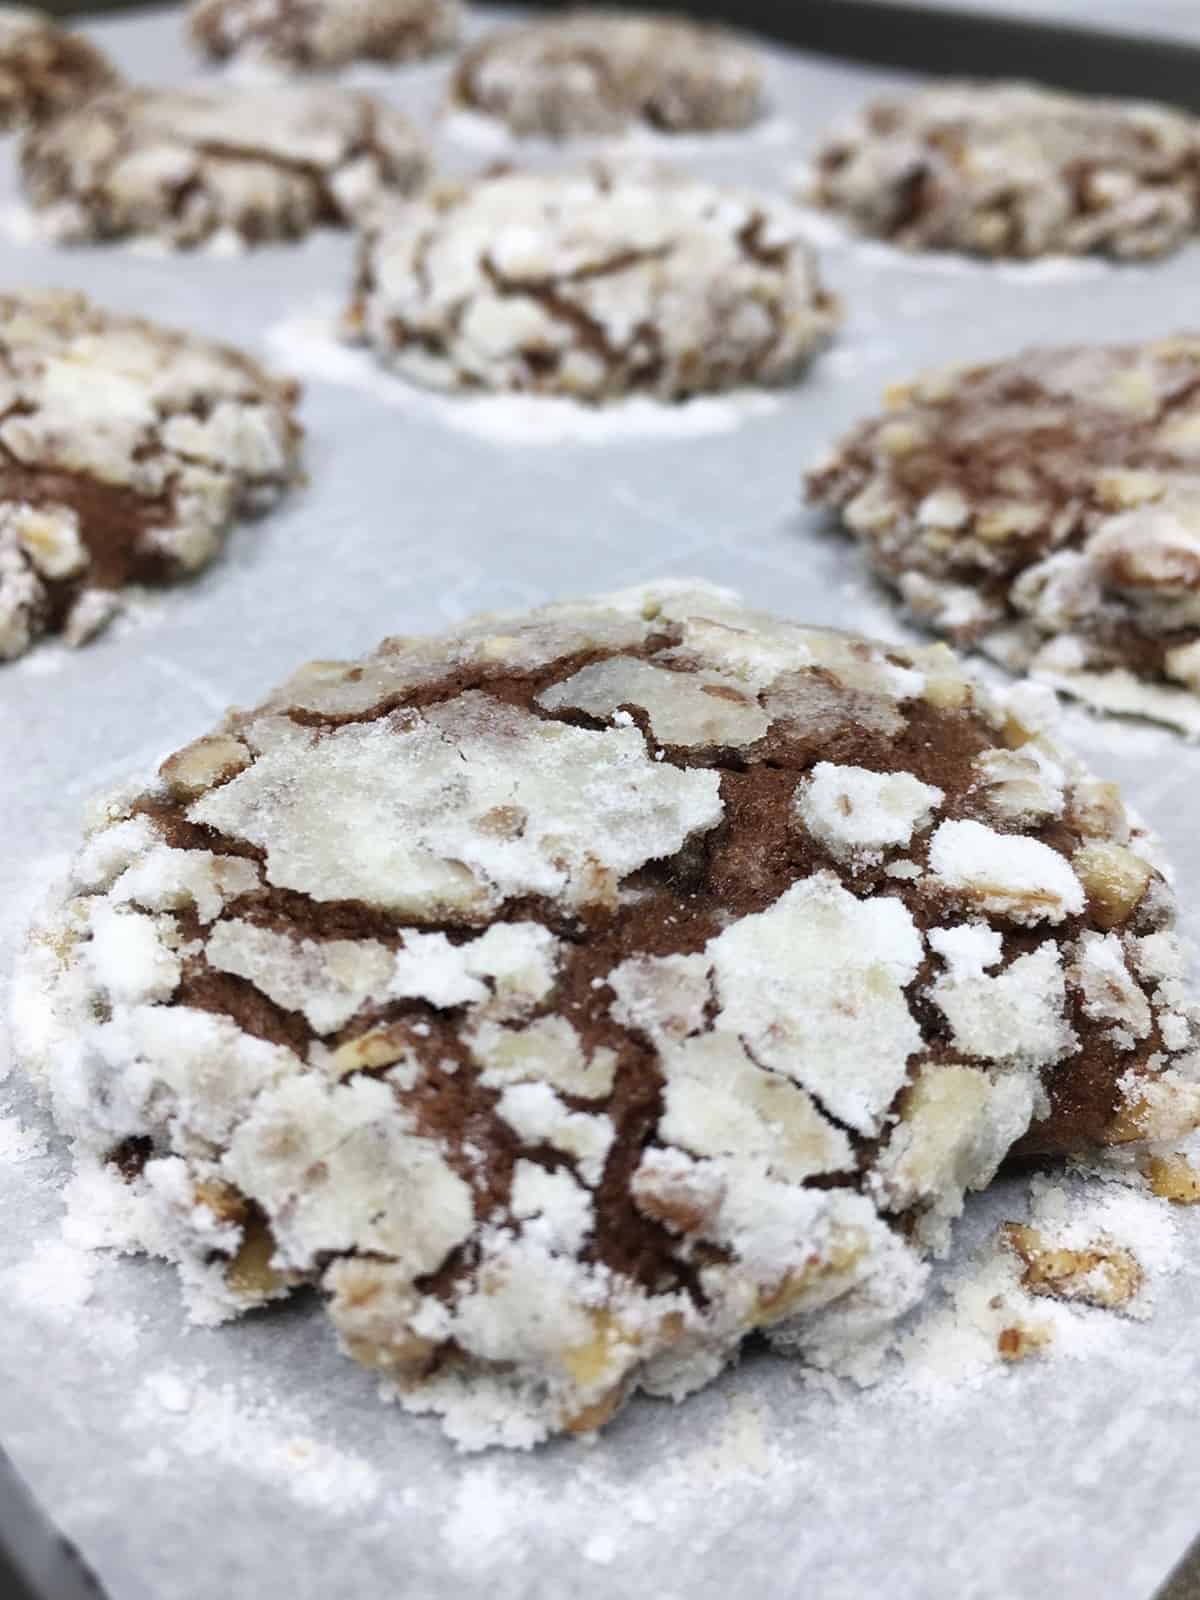 Chocolate banana cookies on parchment paper